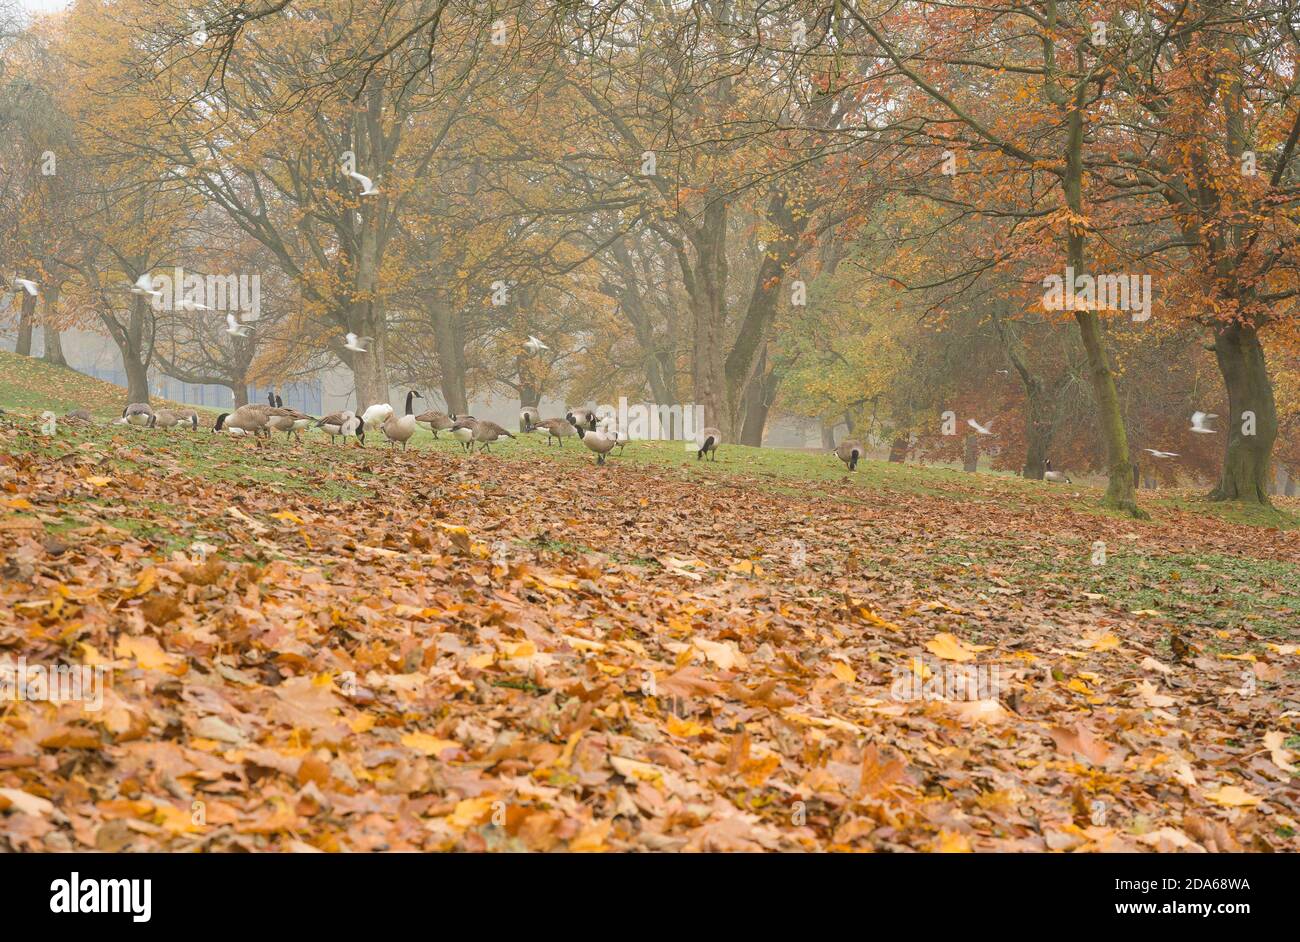 Autumn at Lister Park in Bradford, West Yorkshire, UK Stock Photo